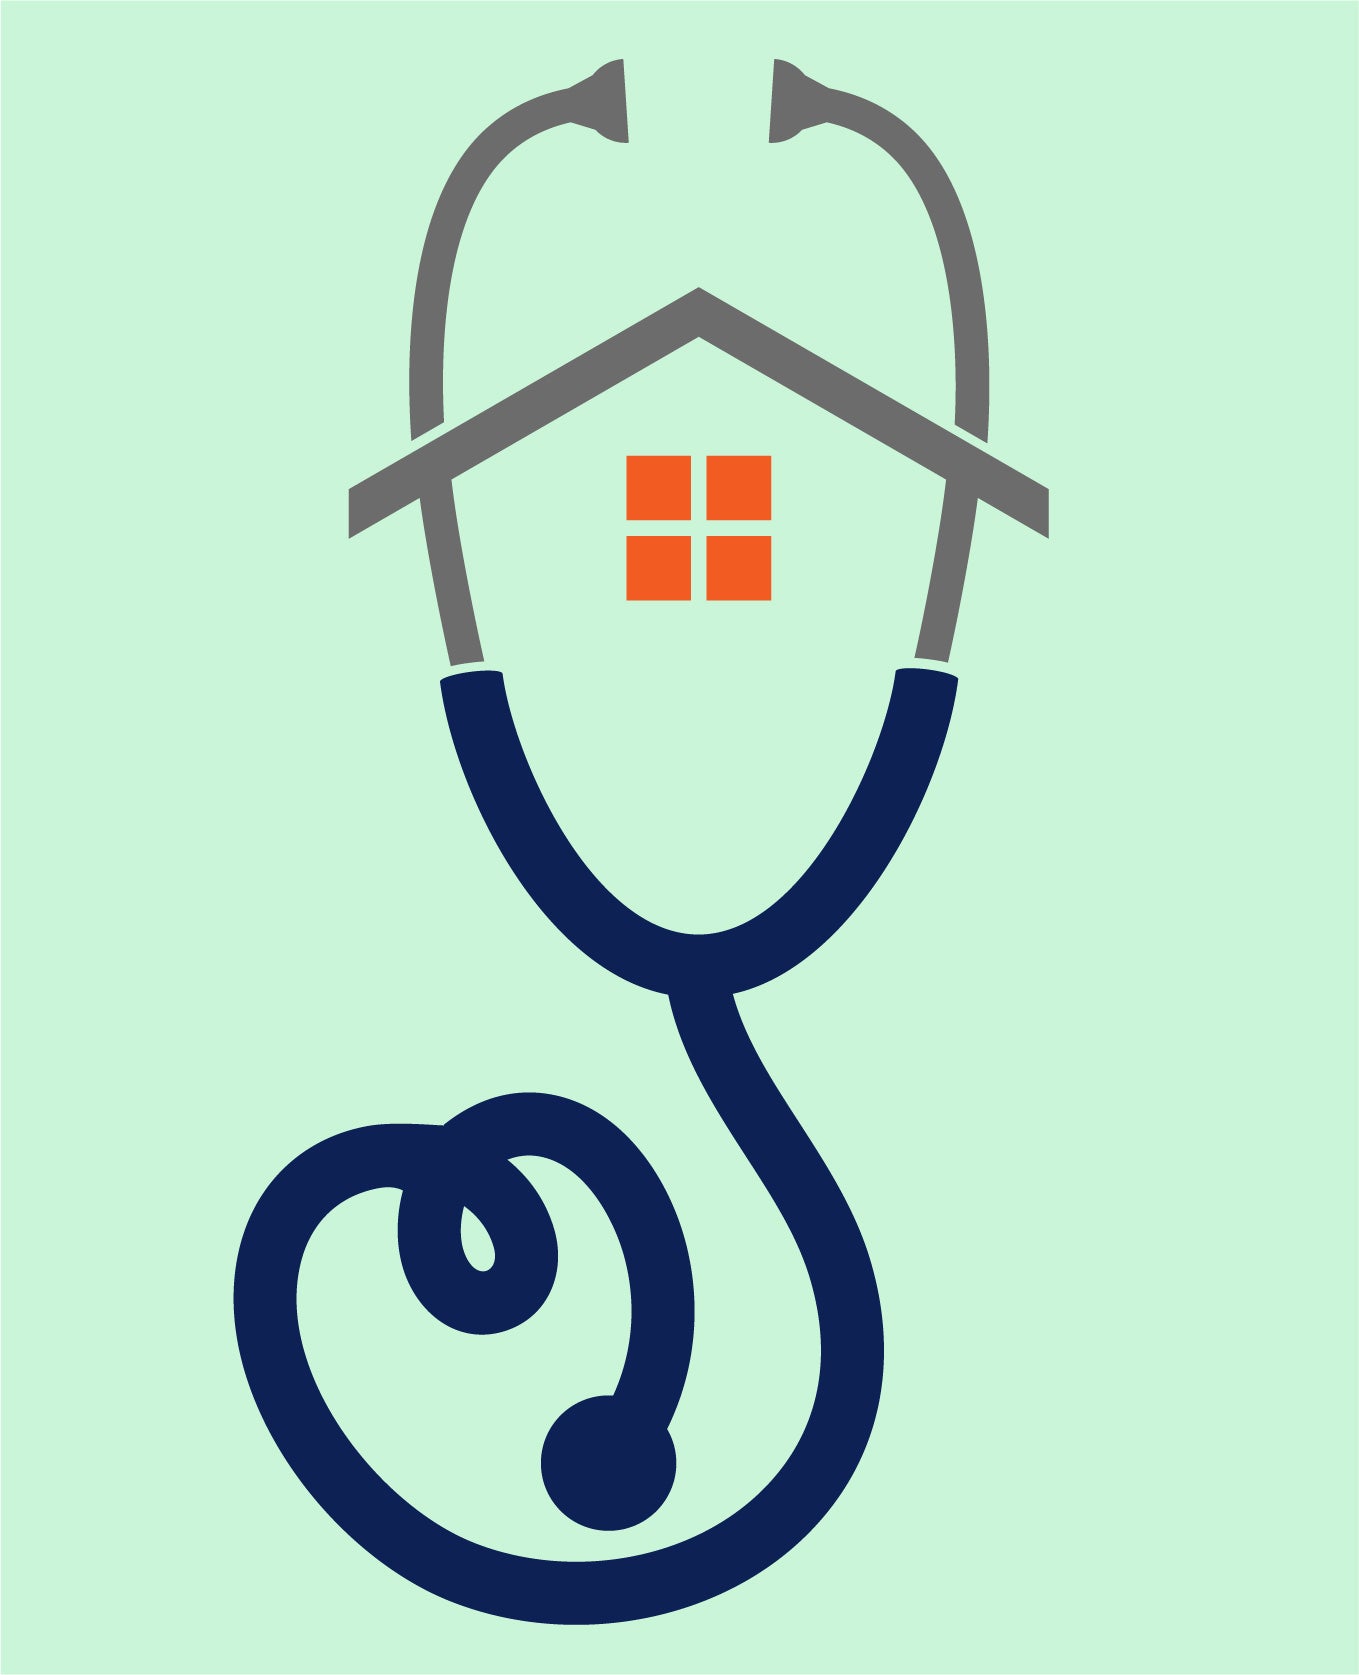 Illustration: Navy and gray stethoscope with the metal portions creating a house. Four orange squares representing windows are in the center. Background is seafoam green.